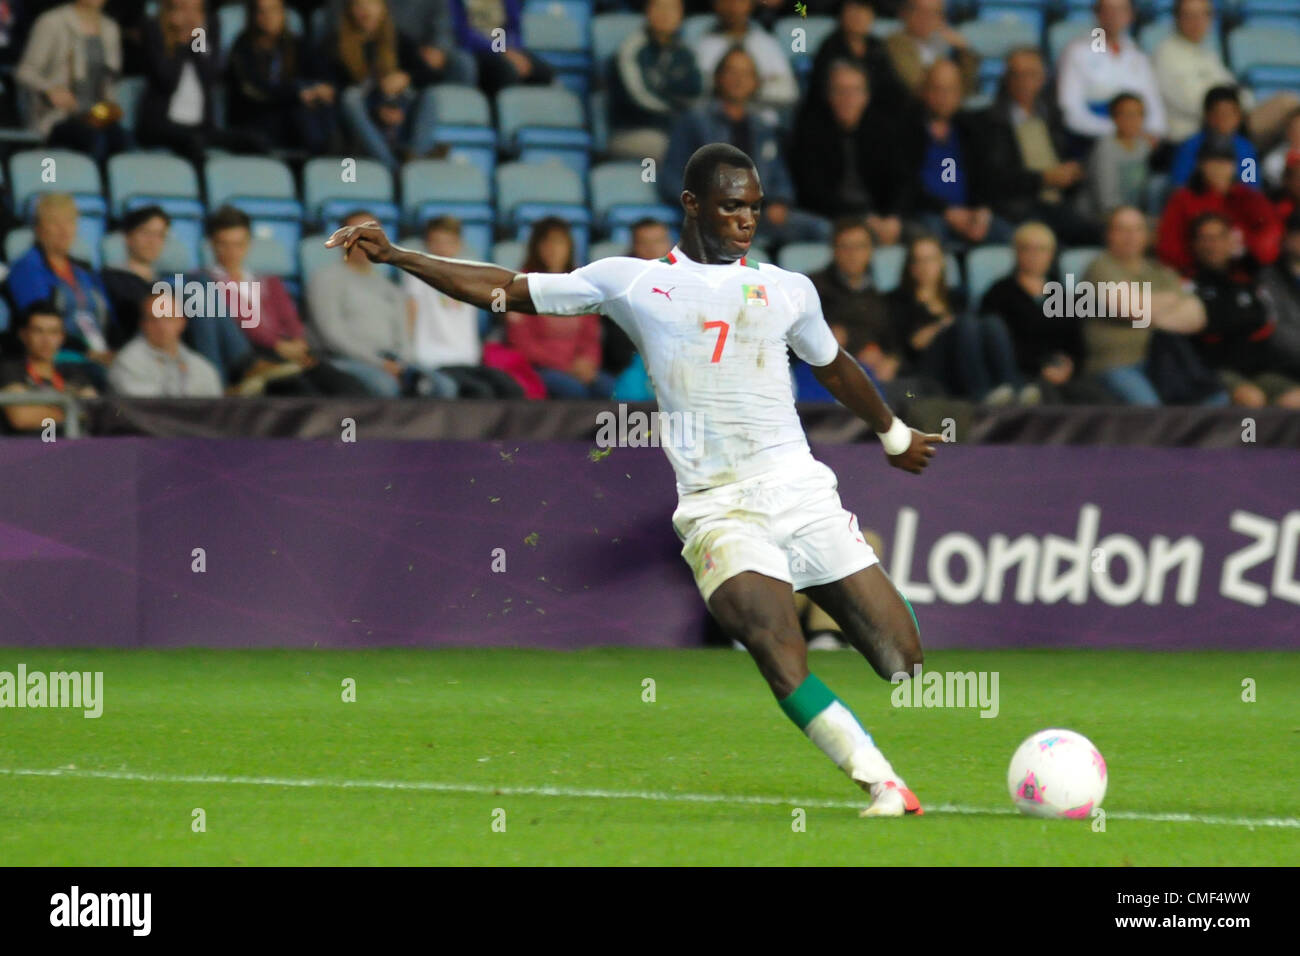 01.08.2012 Coventry, England. Moussa KONATE (Senegal) in action during the Olympic Football Men's Preliminary game between Senegal and United Arab Emirates from the City of Coventry Stadium Stock Photo